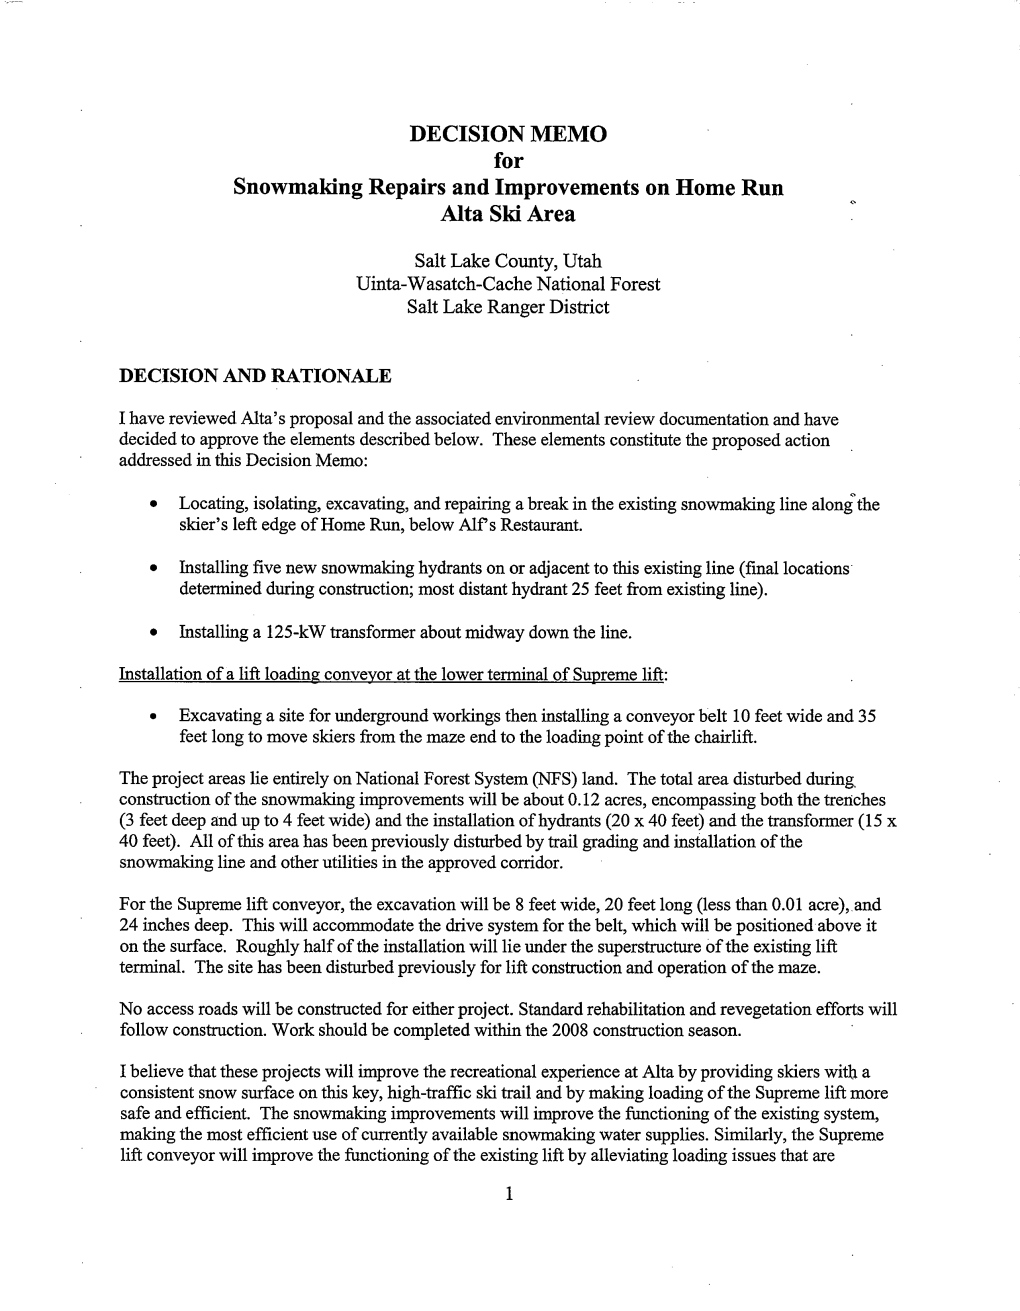 DECISION MEMO for Snowmaking Repairs and Improvements on Home Run Alta Ski Area